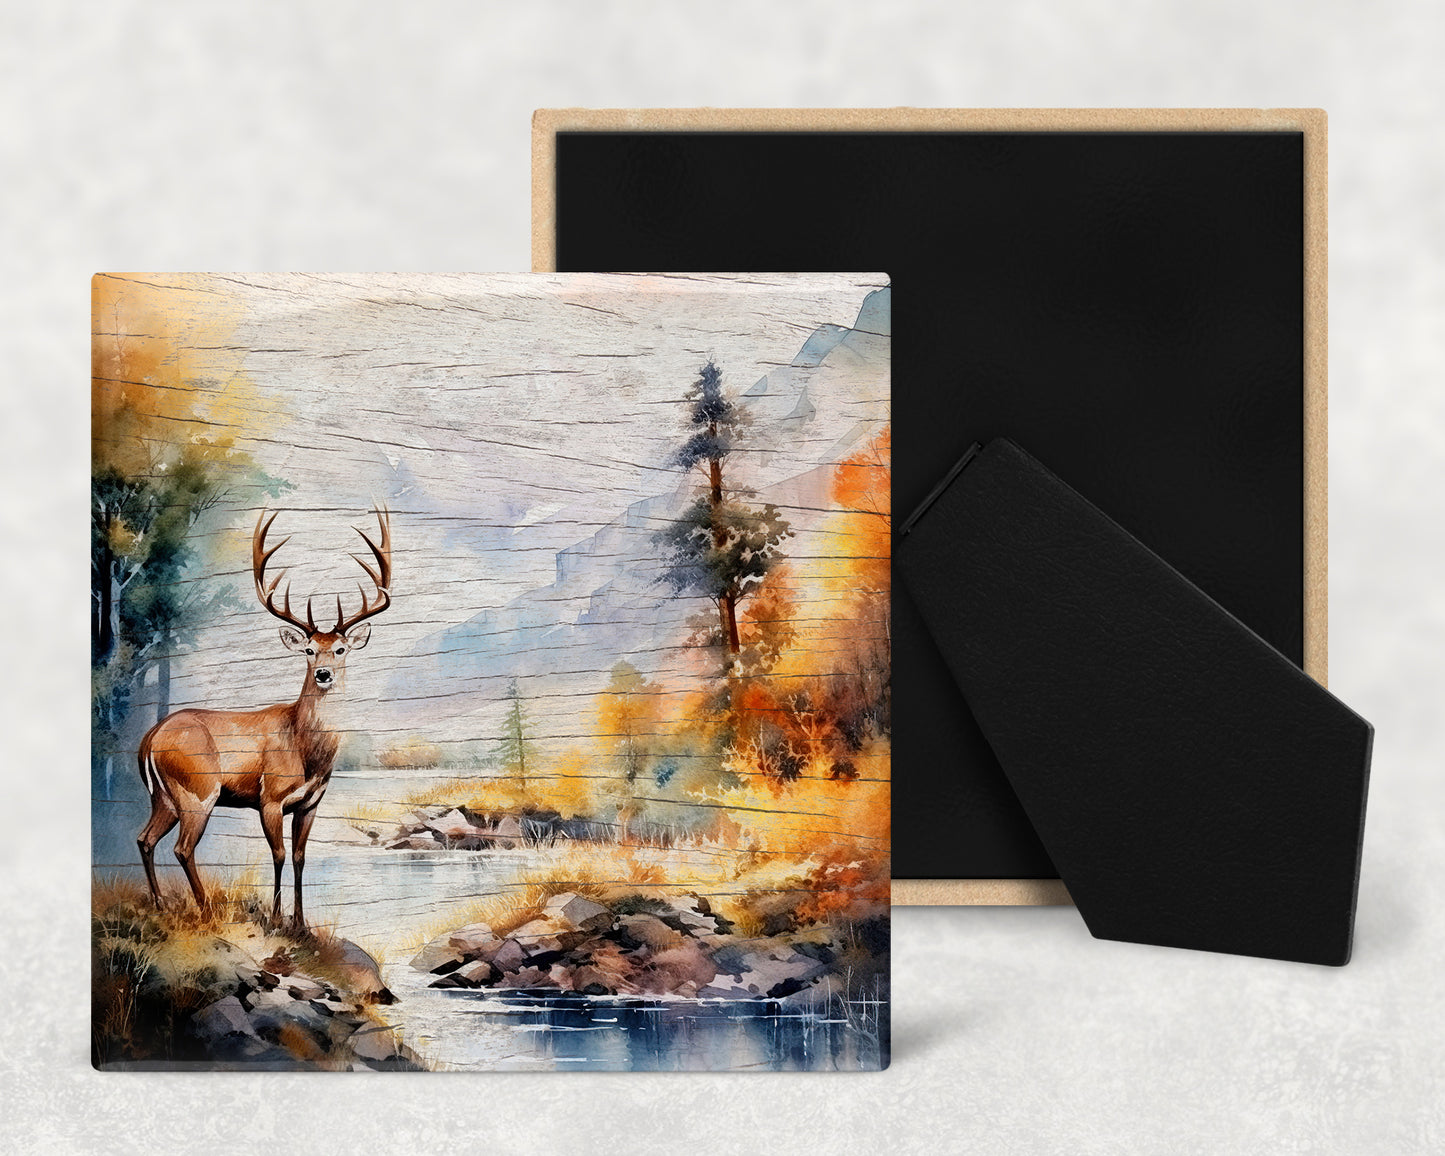 a painting of a deer by a river